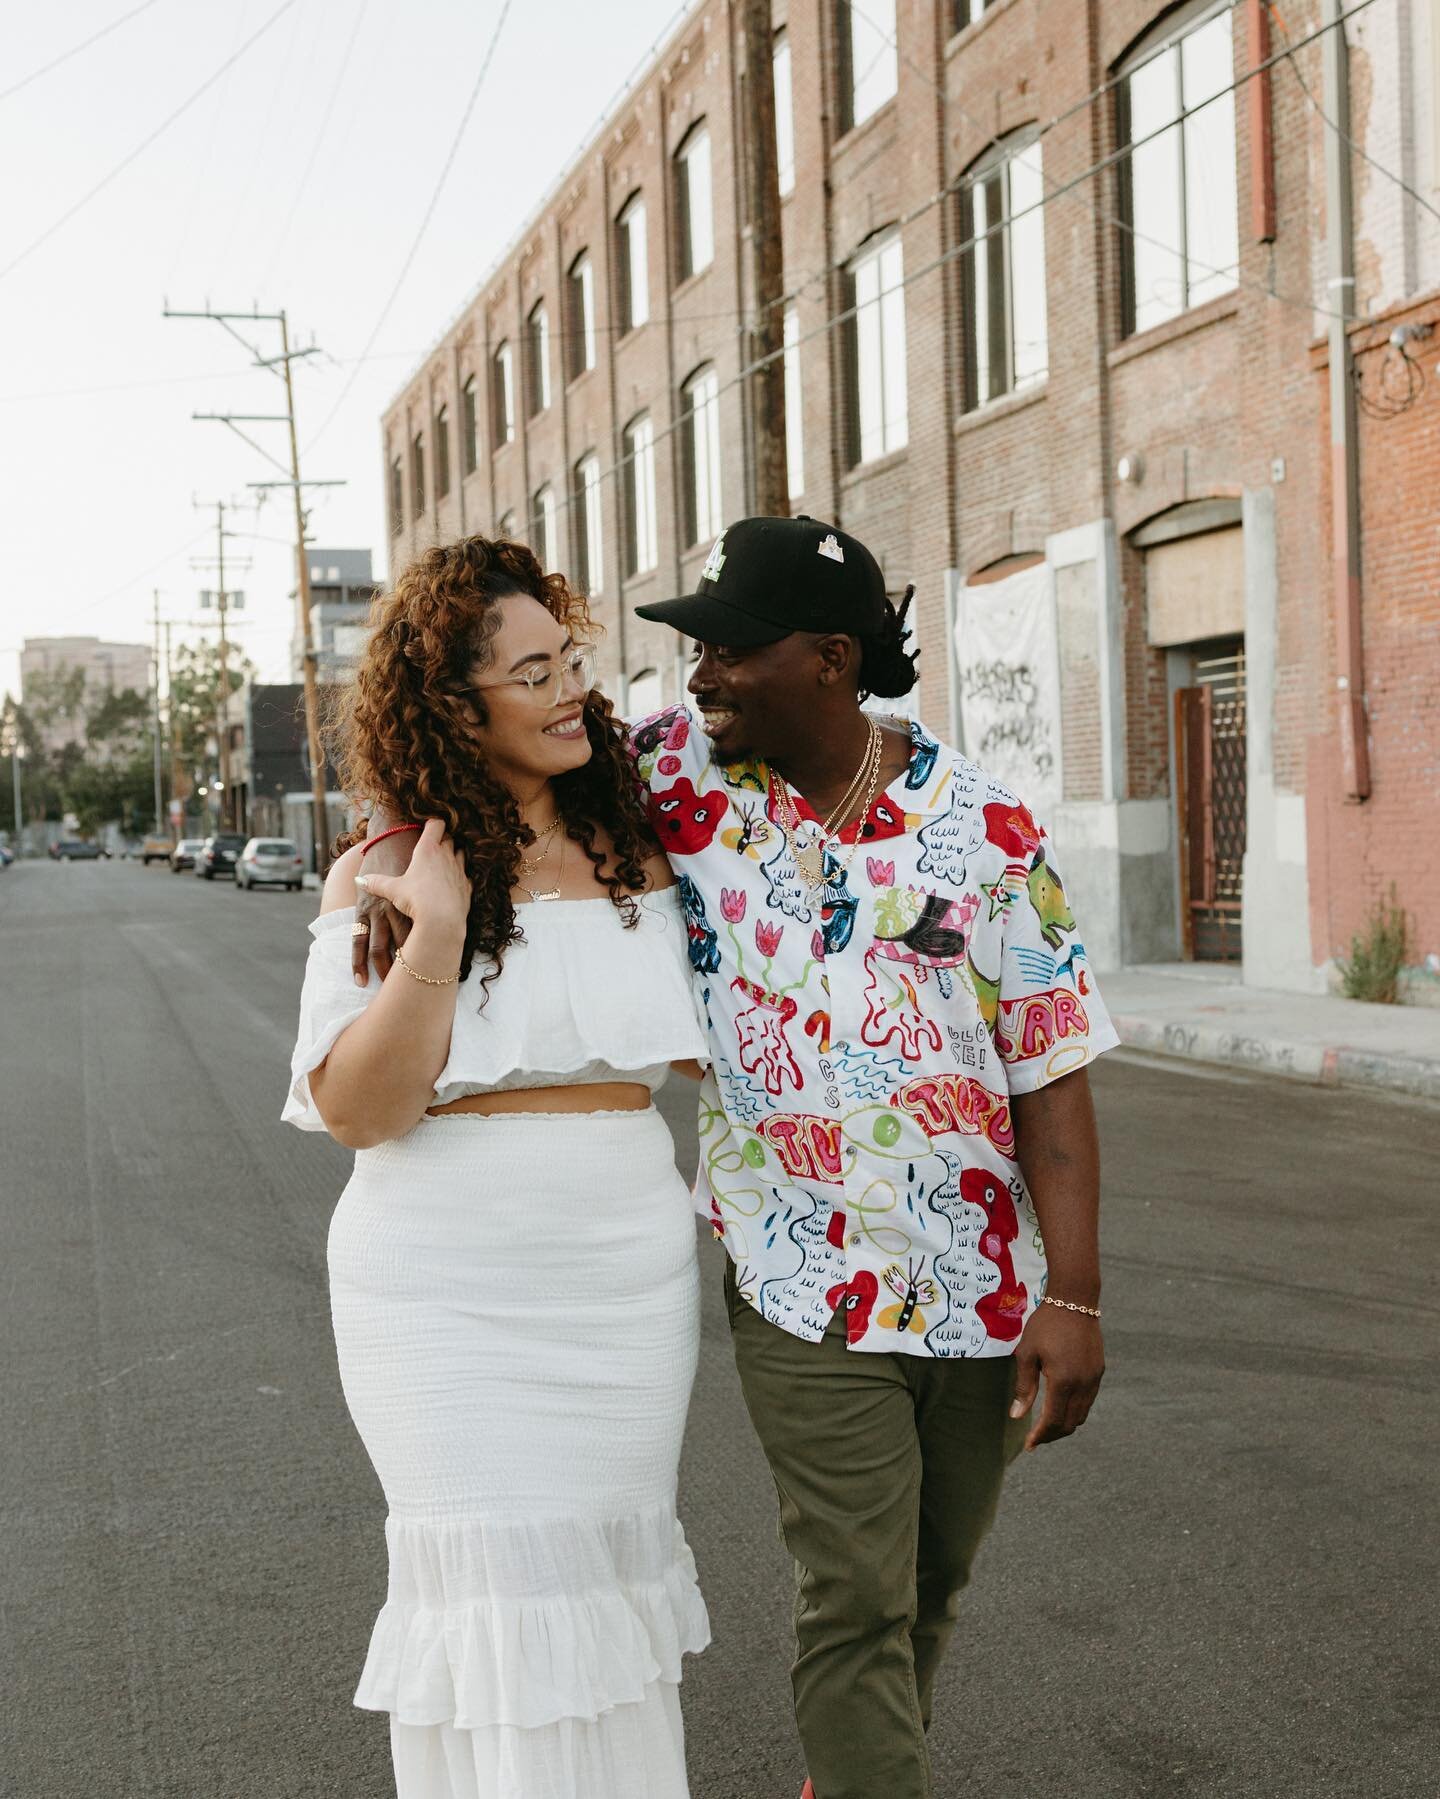 These 2 get married next month and my excitement for this is at 💯

#junebugweddings  #engagementsession #engaged #engagement #firstandlasts #artdistrictdtla #dtla #lookslikefilmweddings #engagementphotos #everydayIBT #shesaidyes💍 #shesaidyes #Offbe